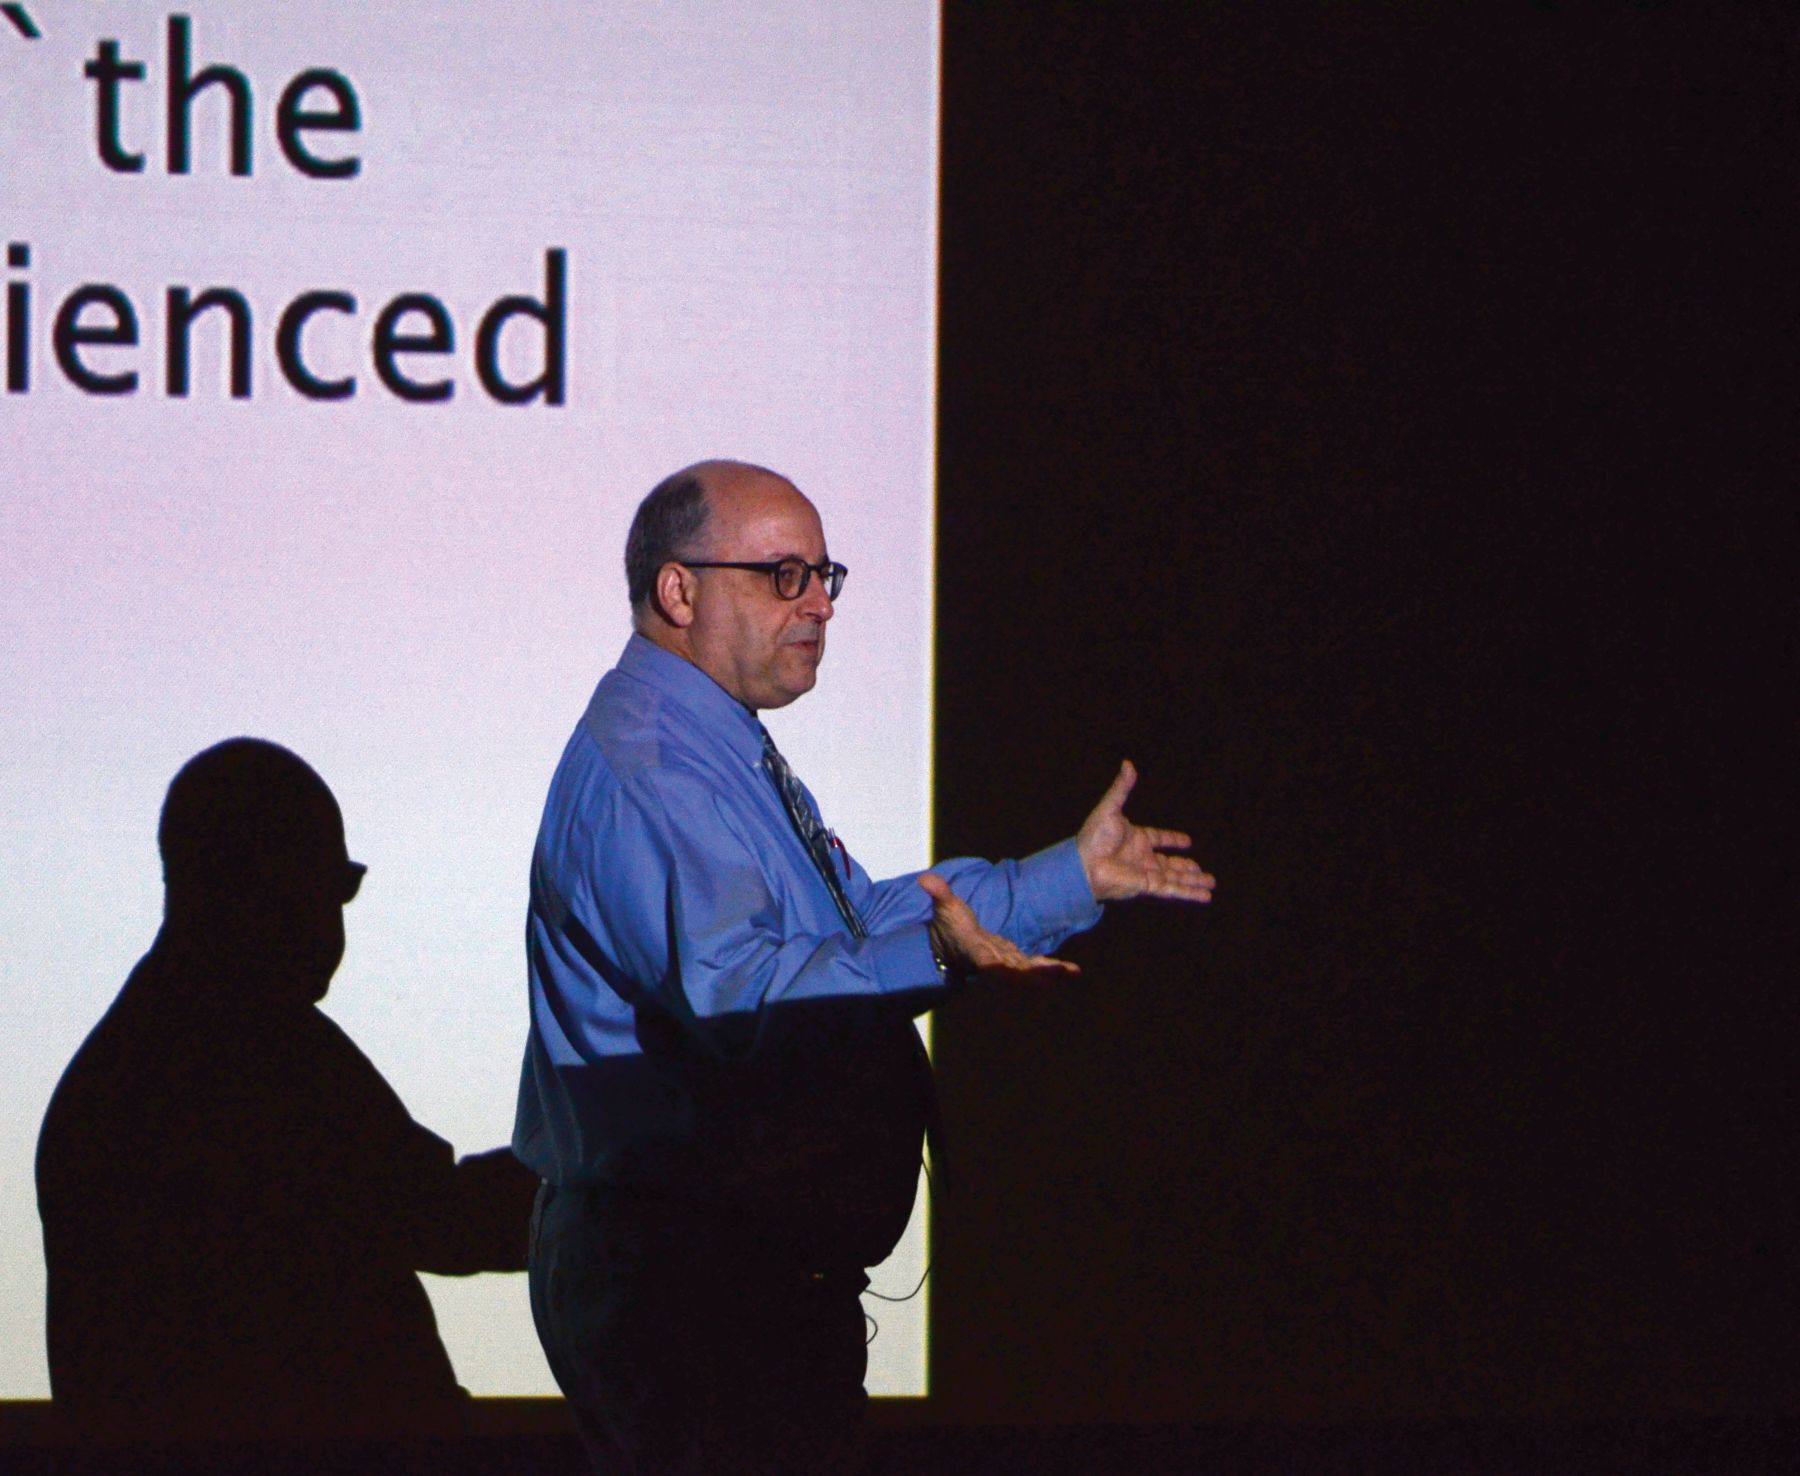 Faculty member Kevin Hagopian in front of a projector screen background gestures during a lecture